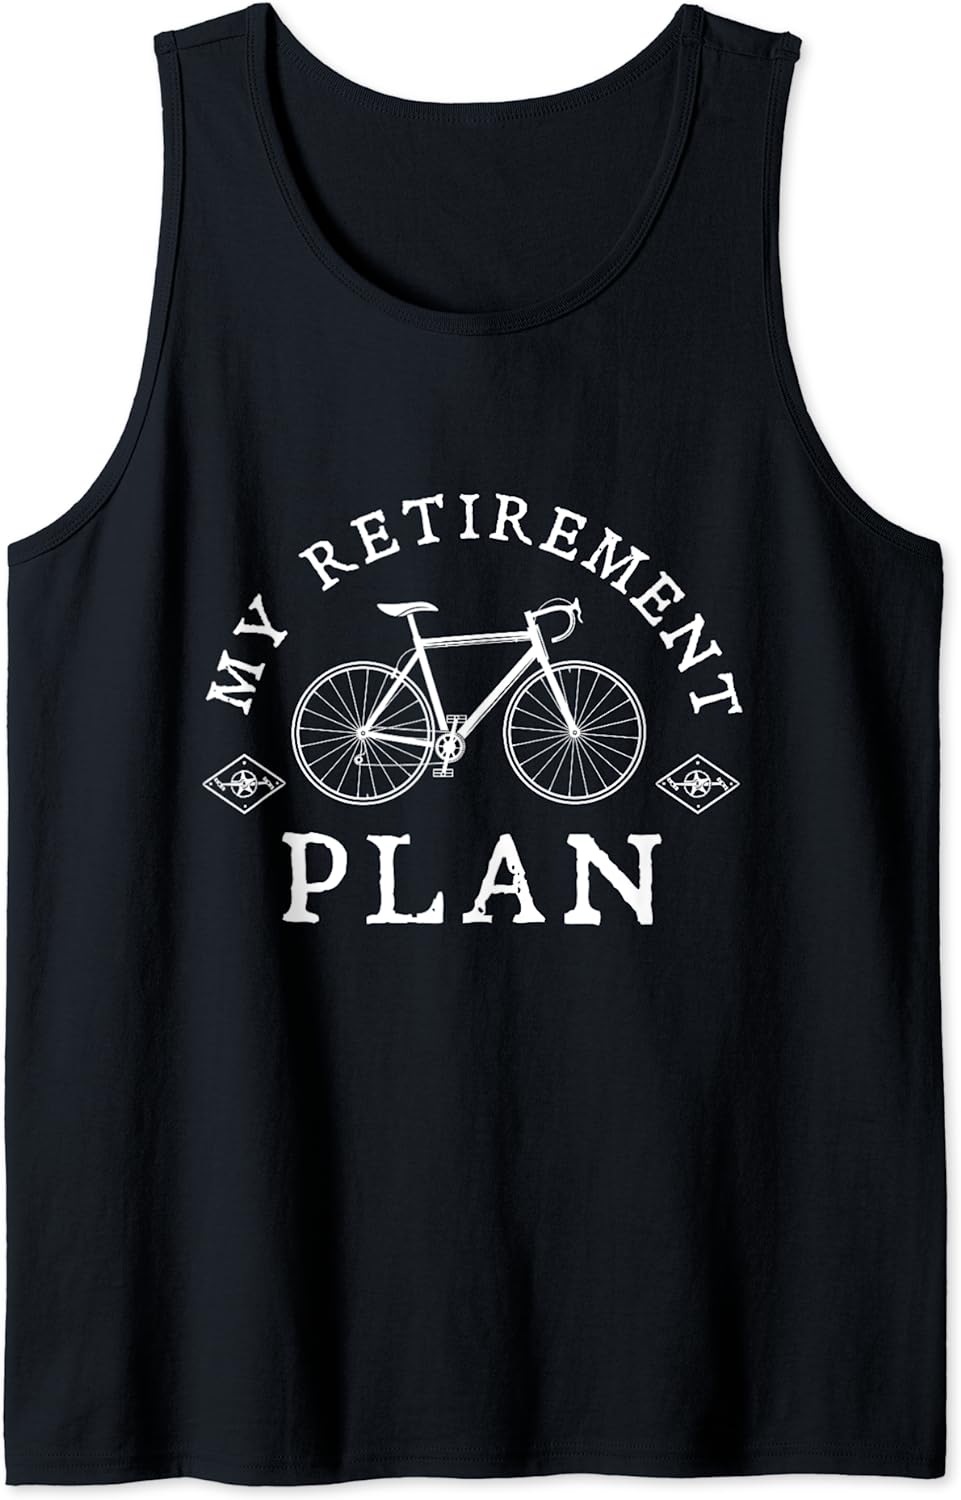 My Retirement Plan Bicycle Riding Funny Bike Lover Cool Tank Top Best Price